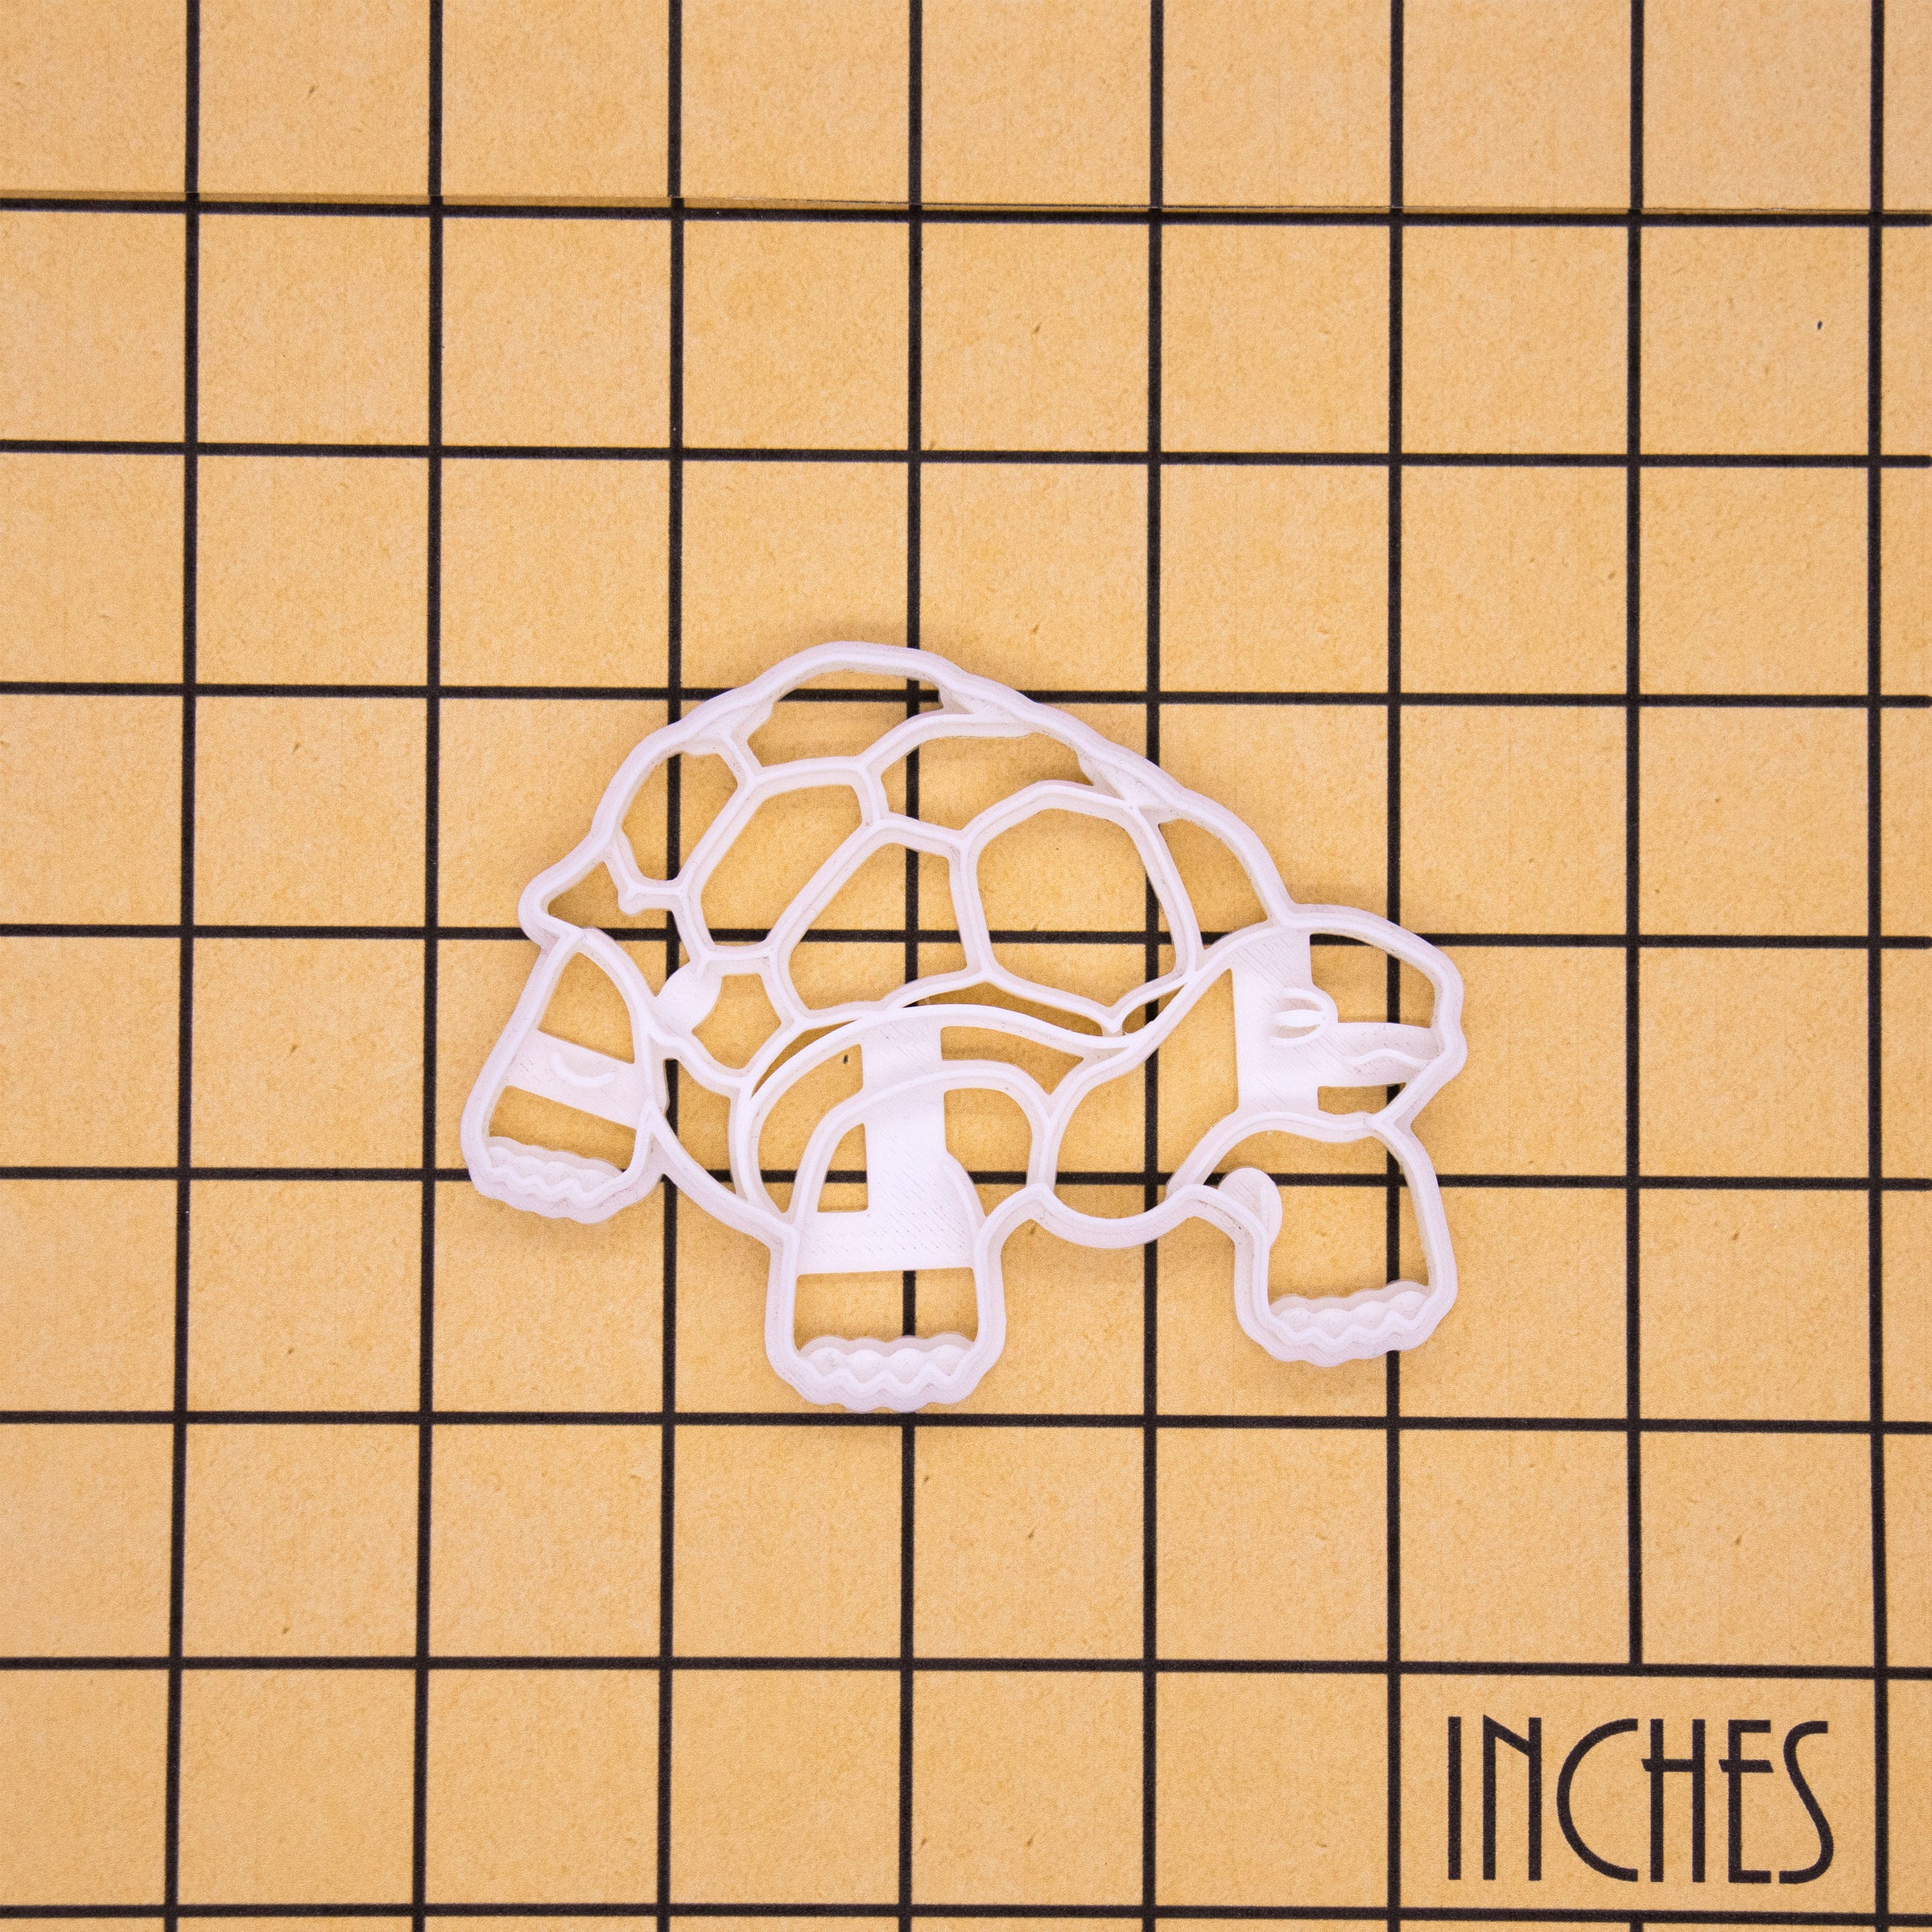 wise tortoise cookie cutter